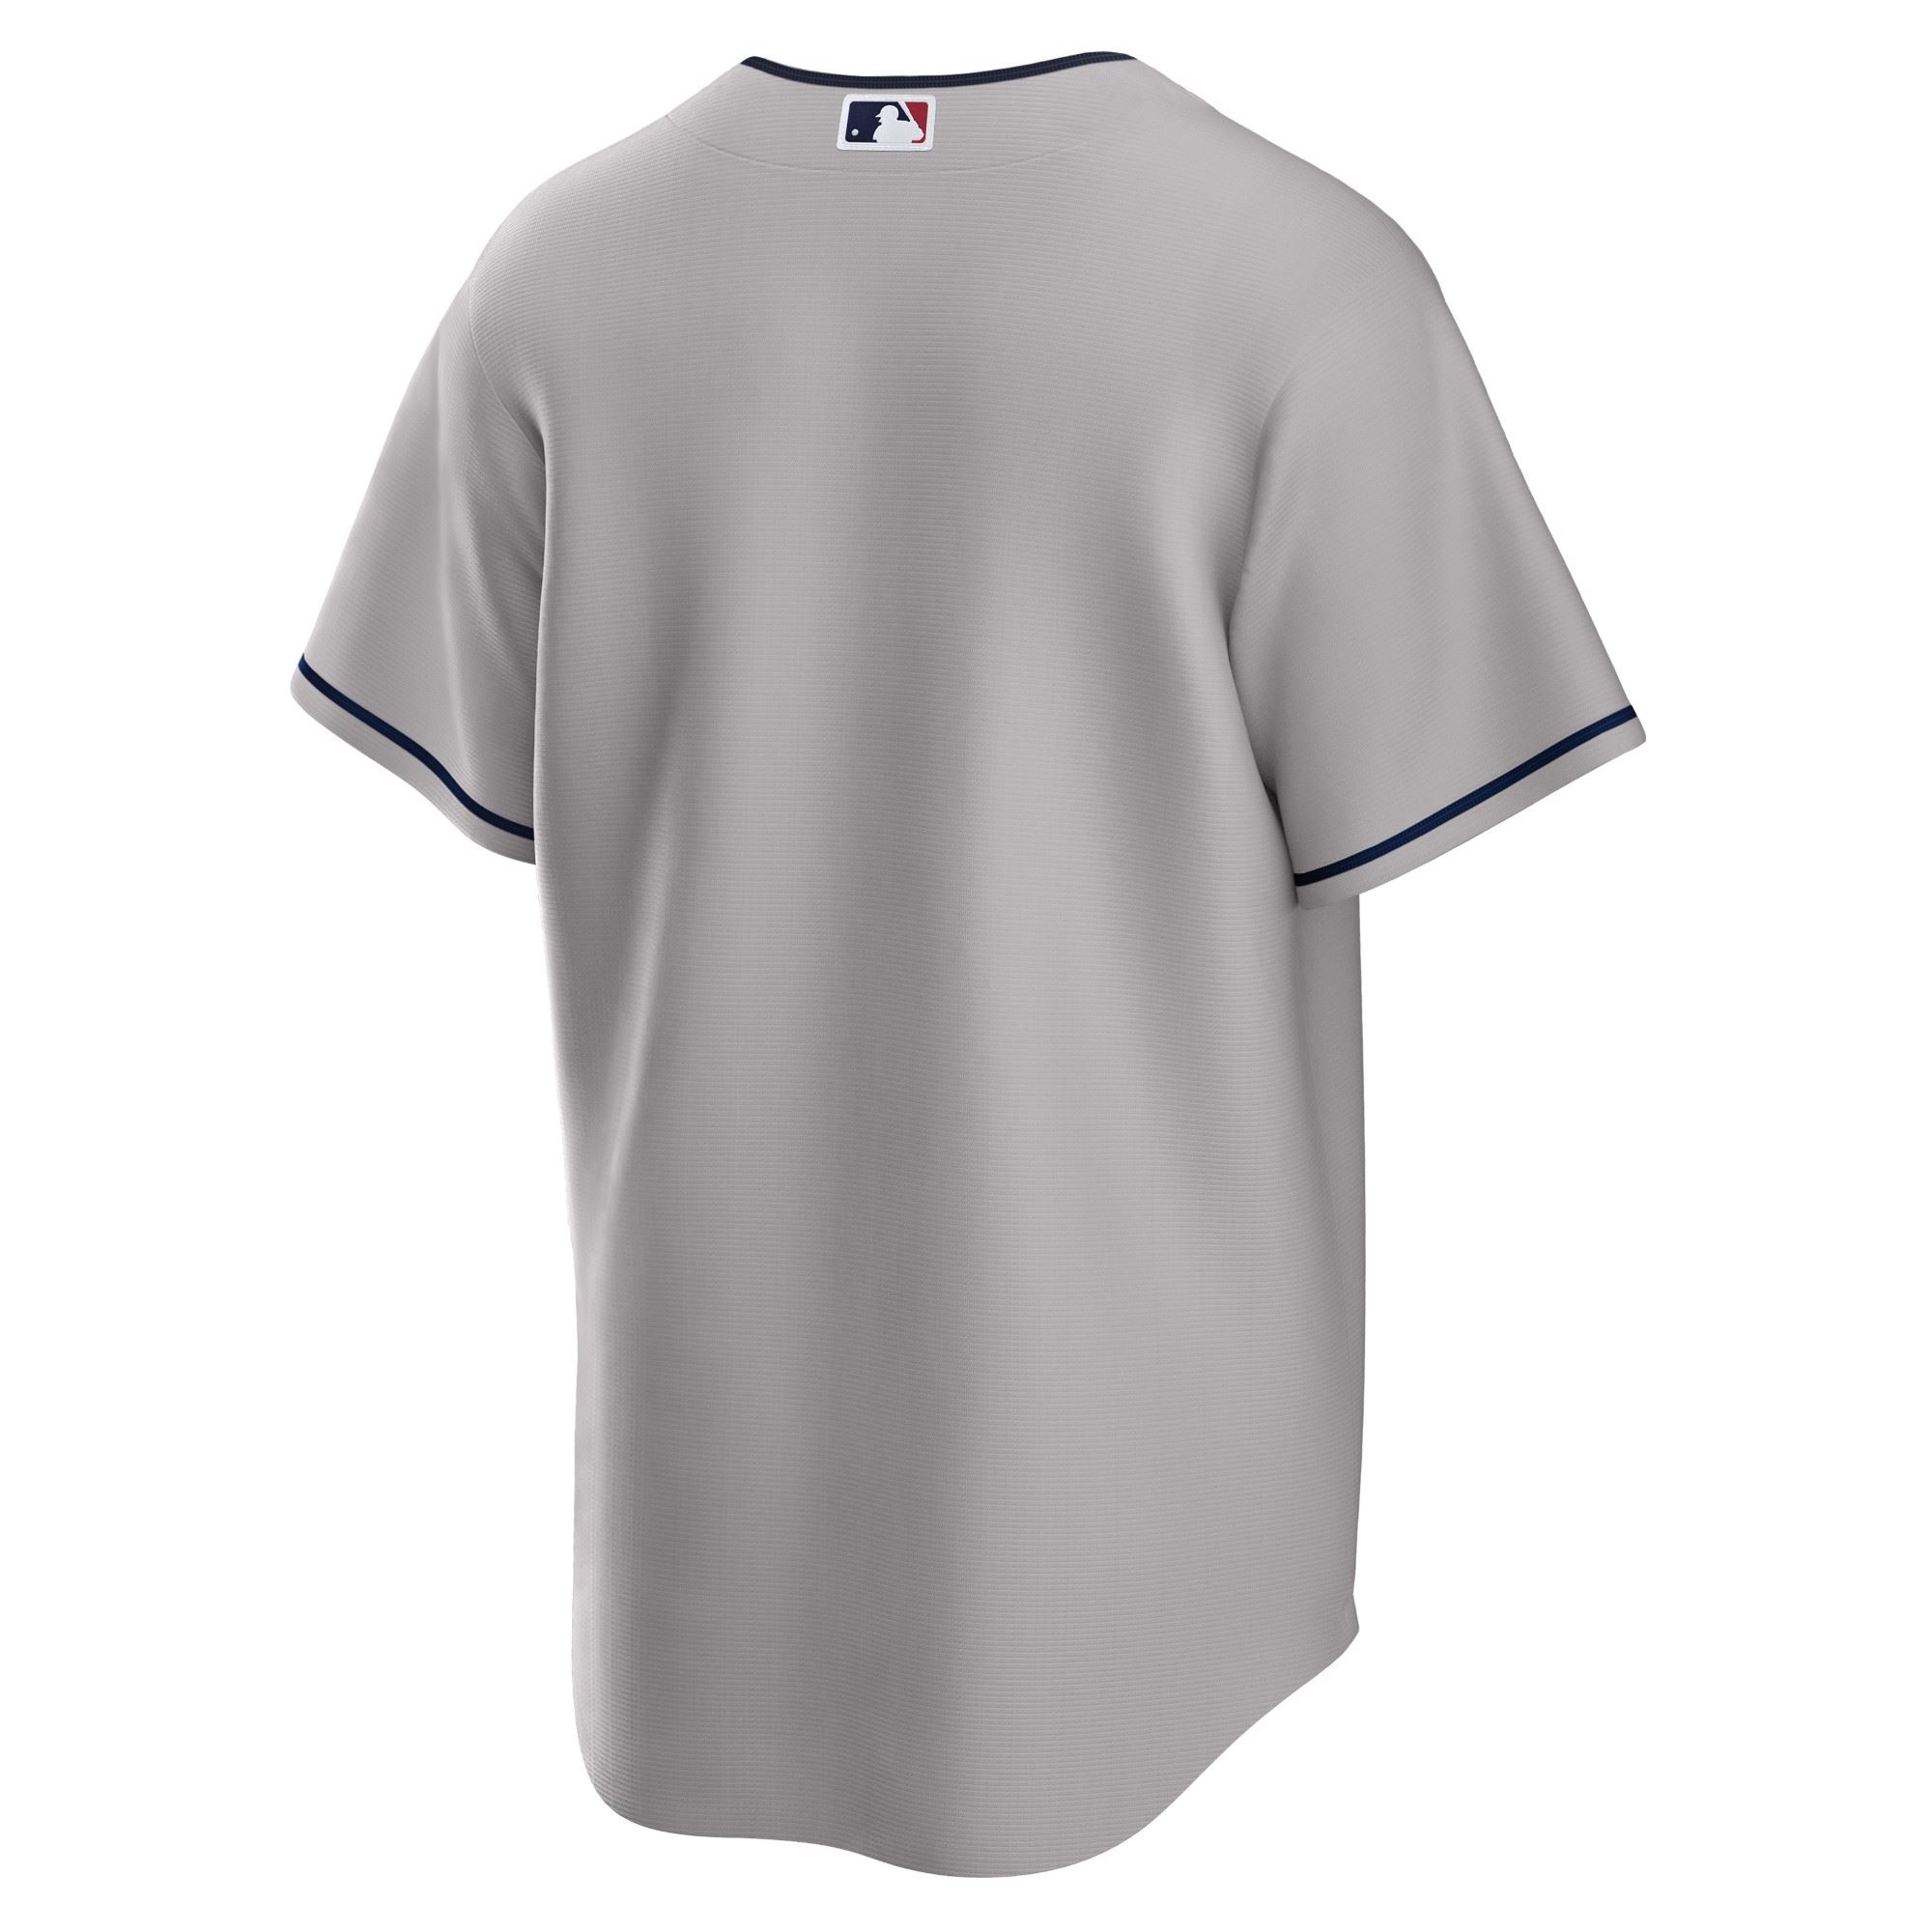 Cleveland Guardians Gray Official MLB Replica Road Jersey Nike